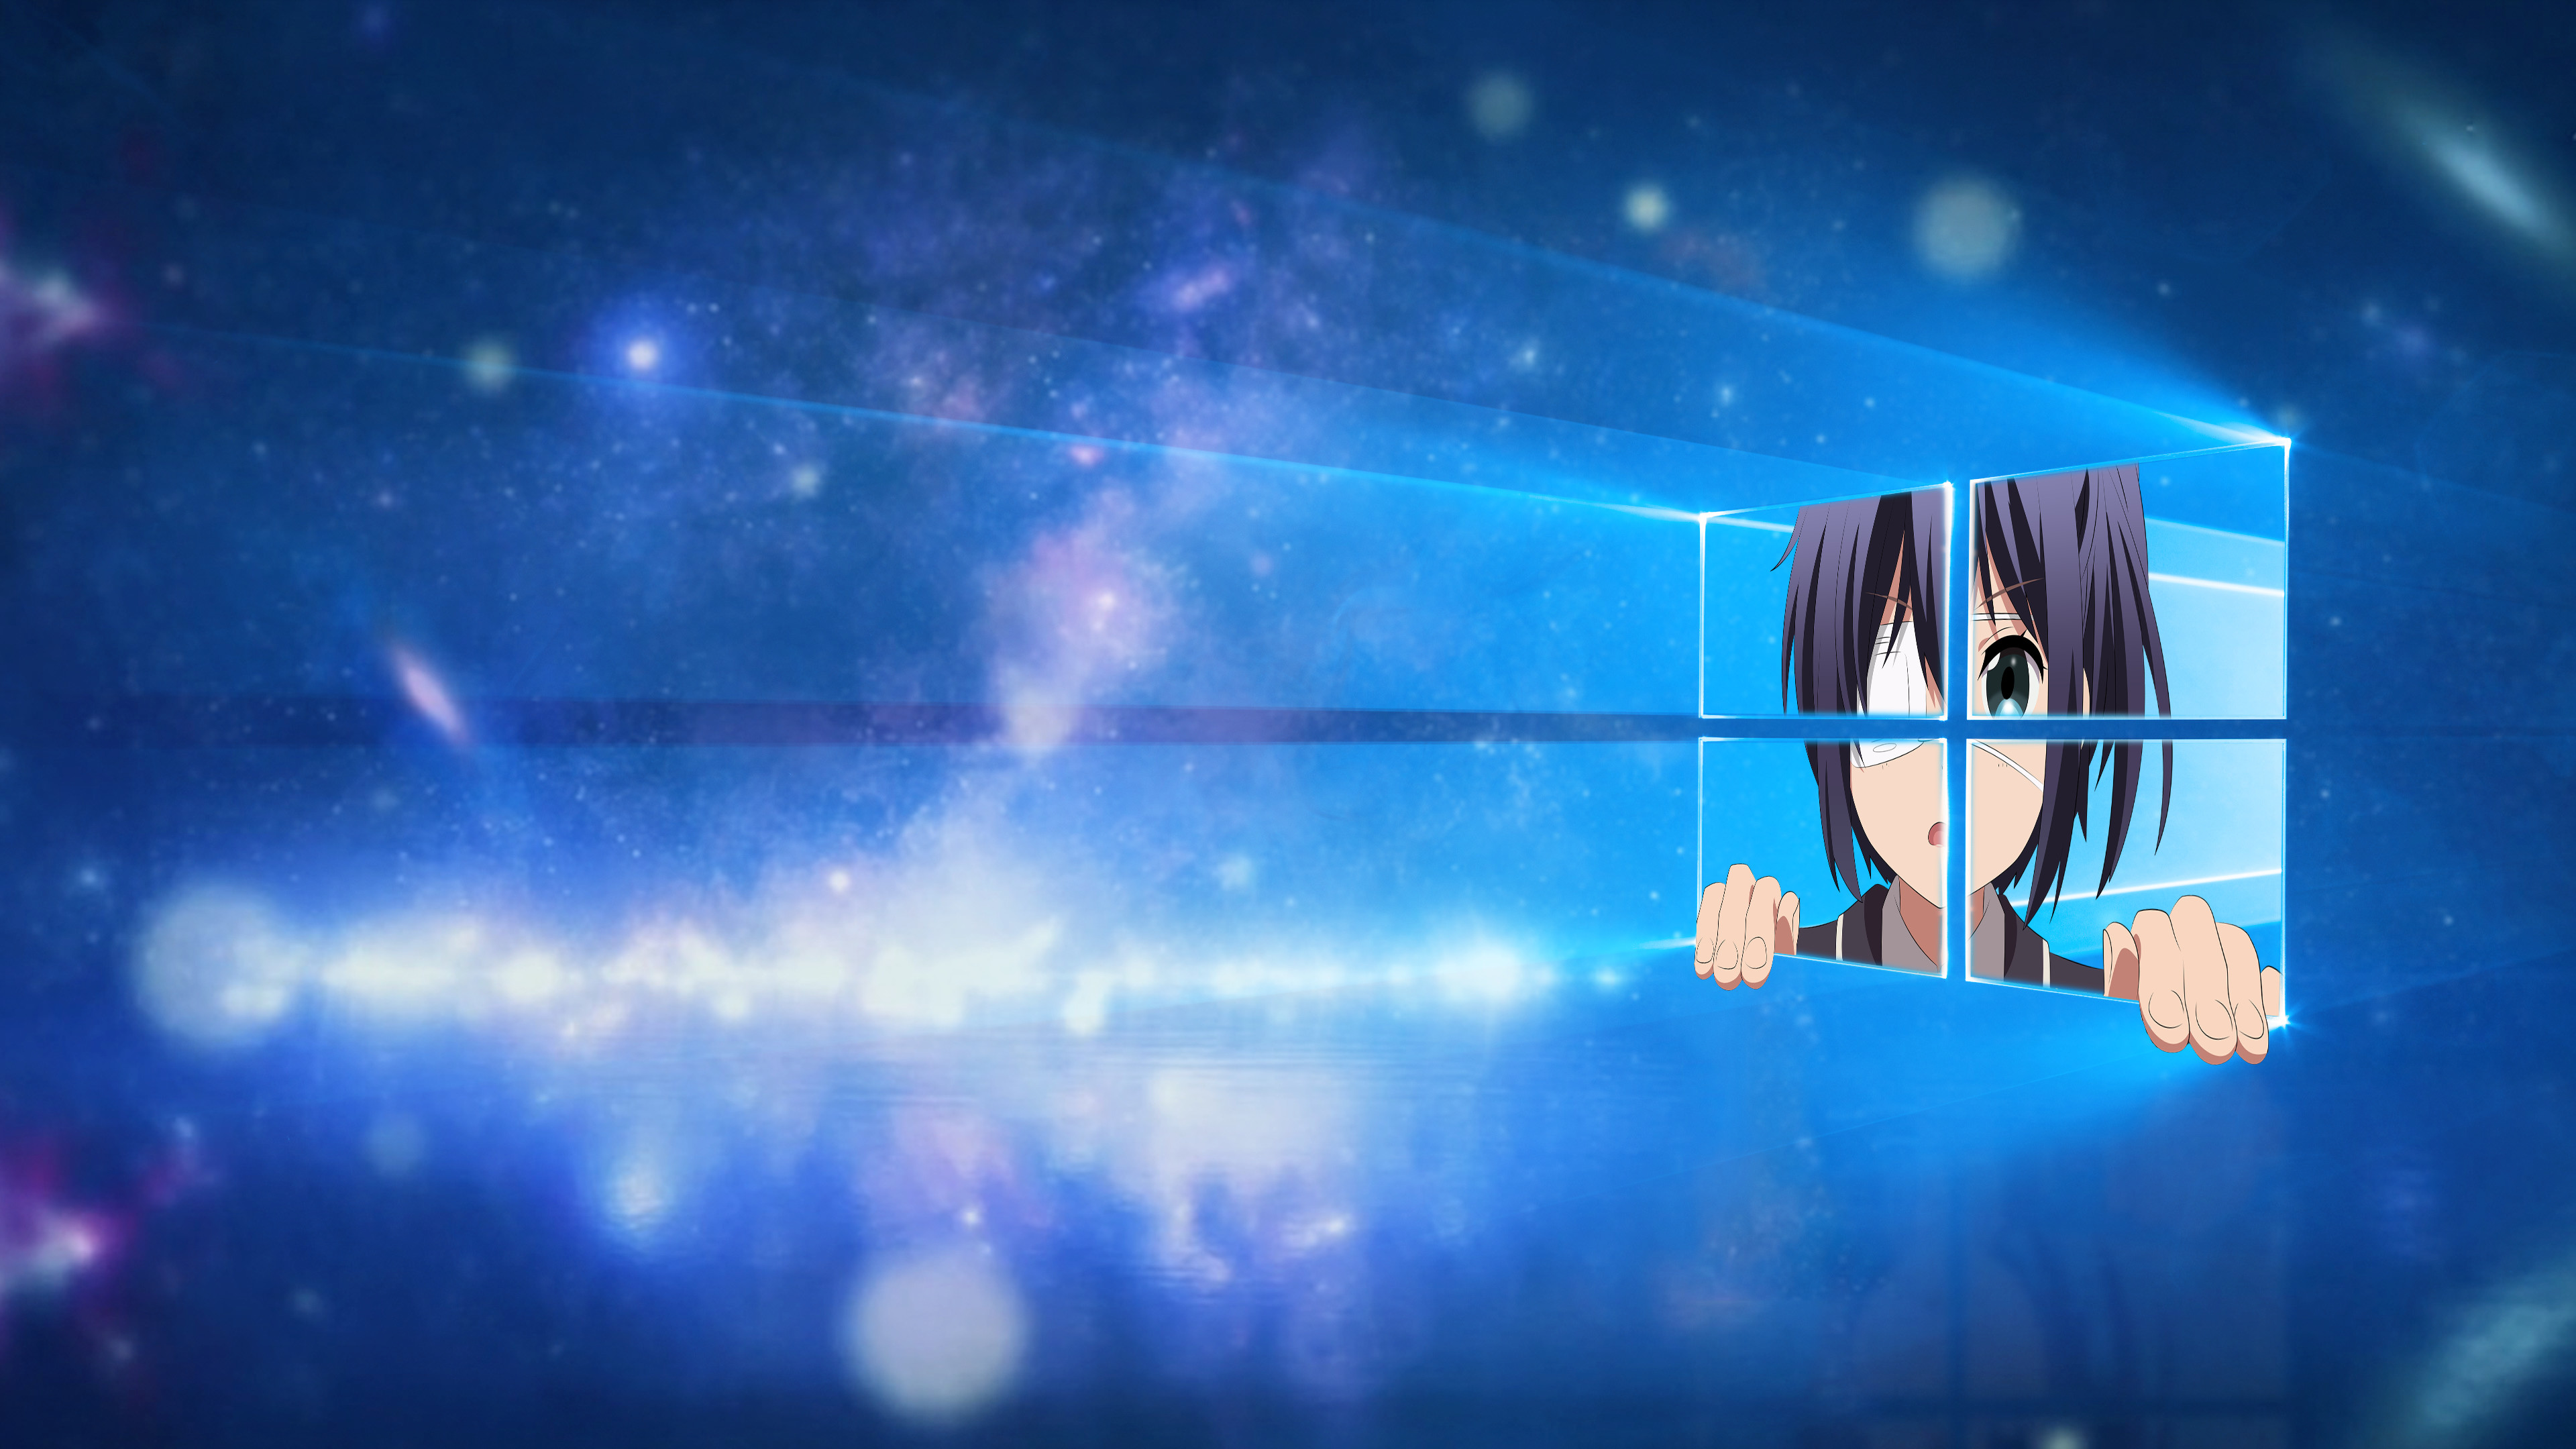 Anime Hd Wallpapers For Windows 8